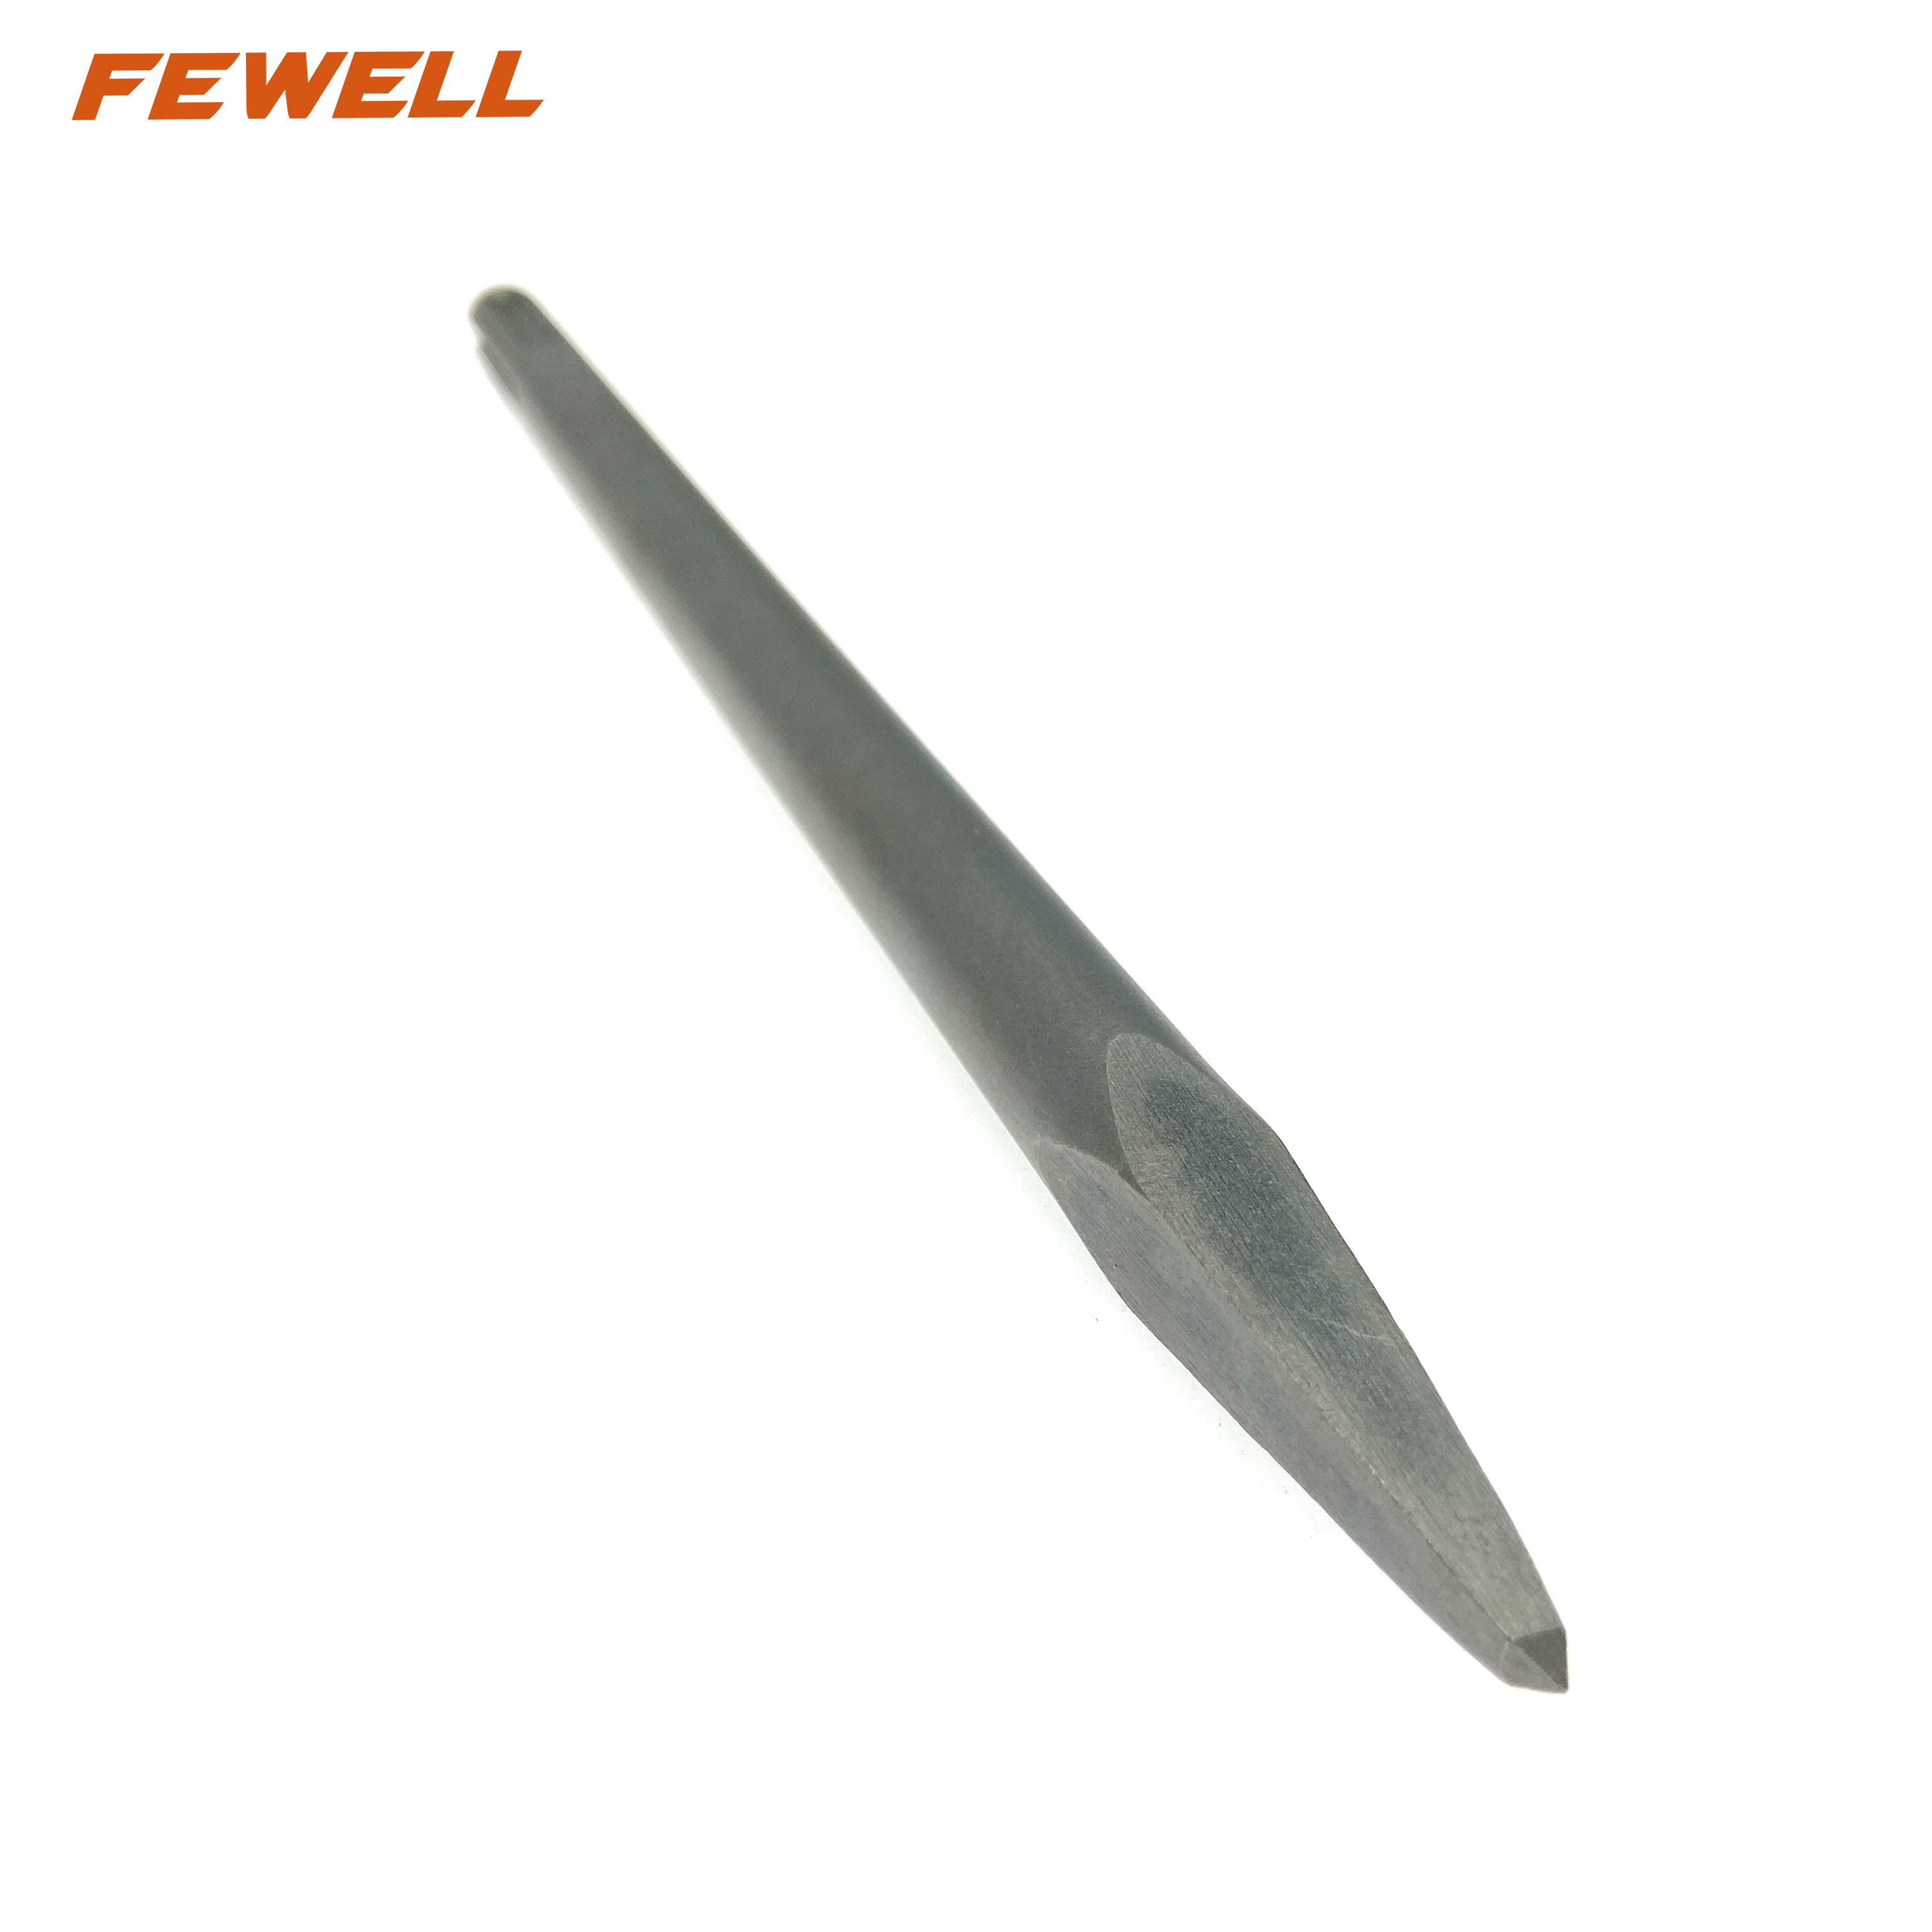 High quality 18x400mm SDS Max Electric hammer drill point chisel for Tile Masonry Concrete Brick stone